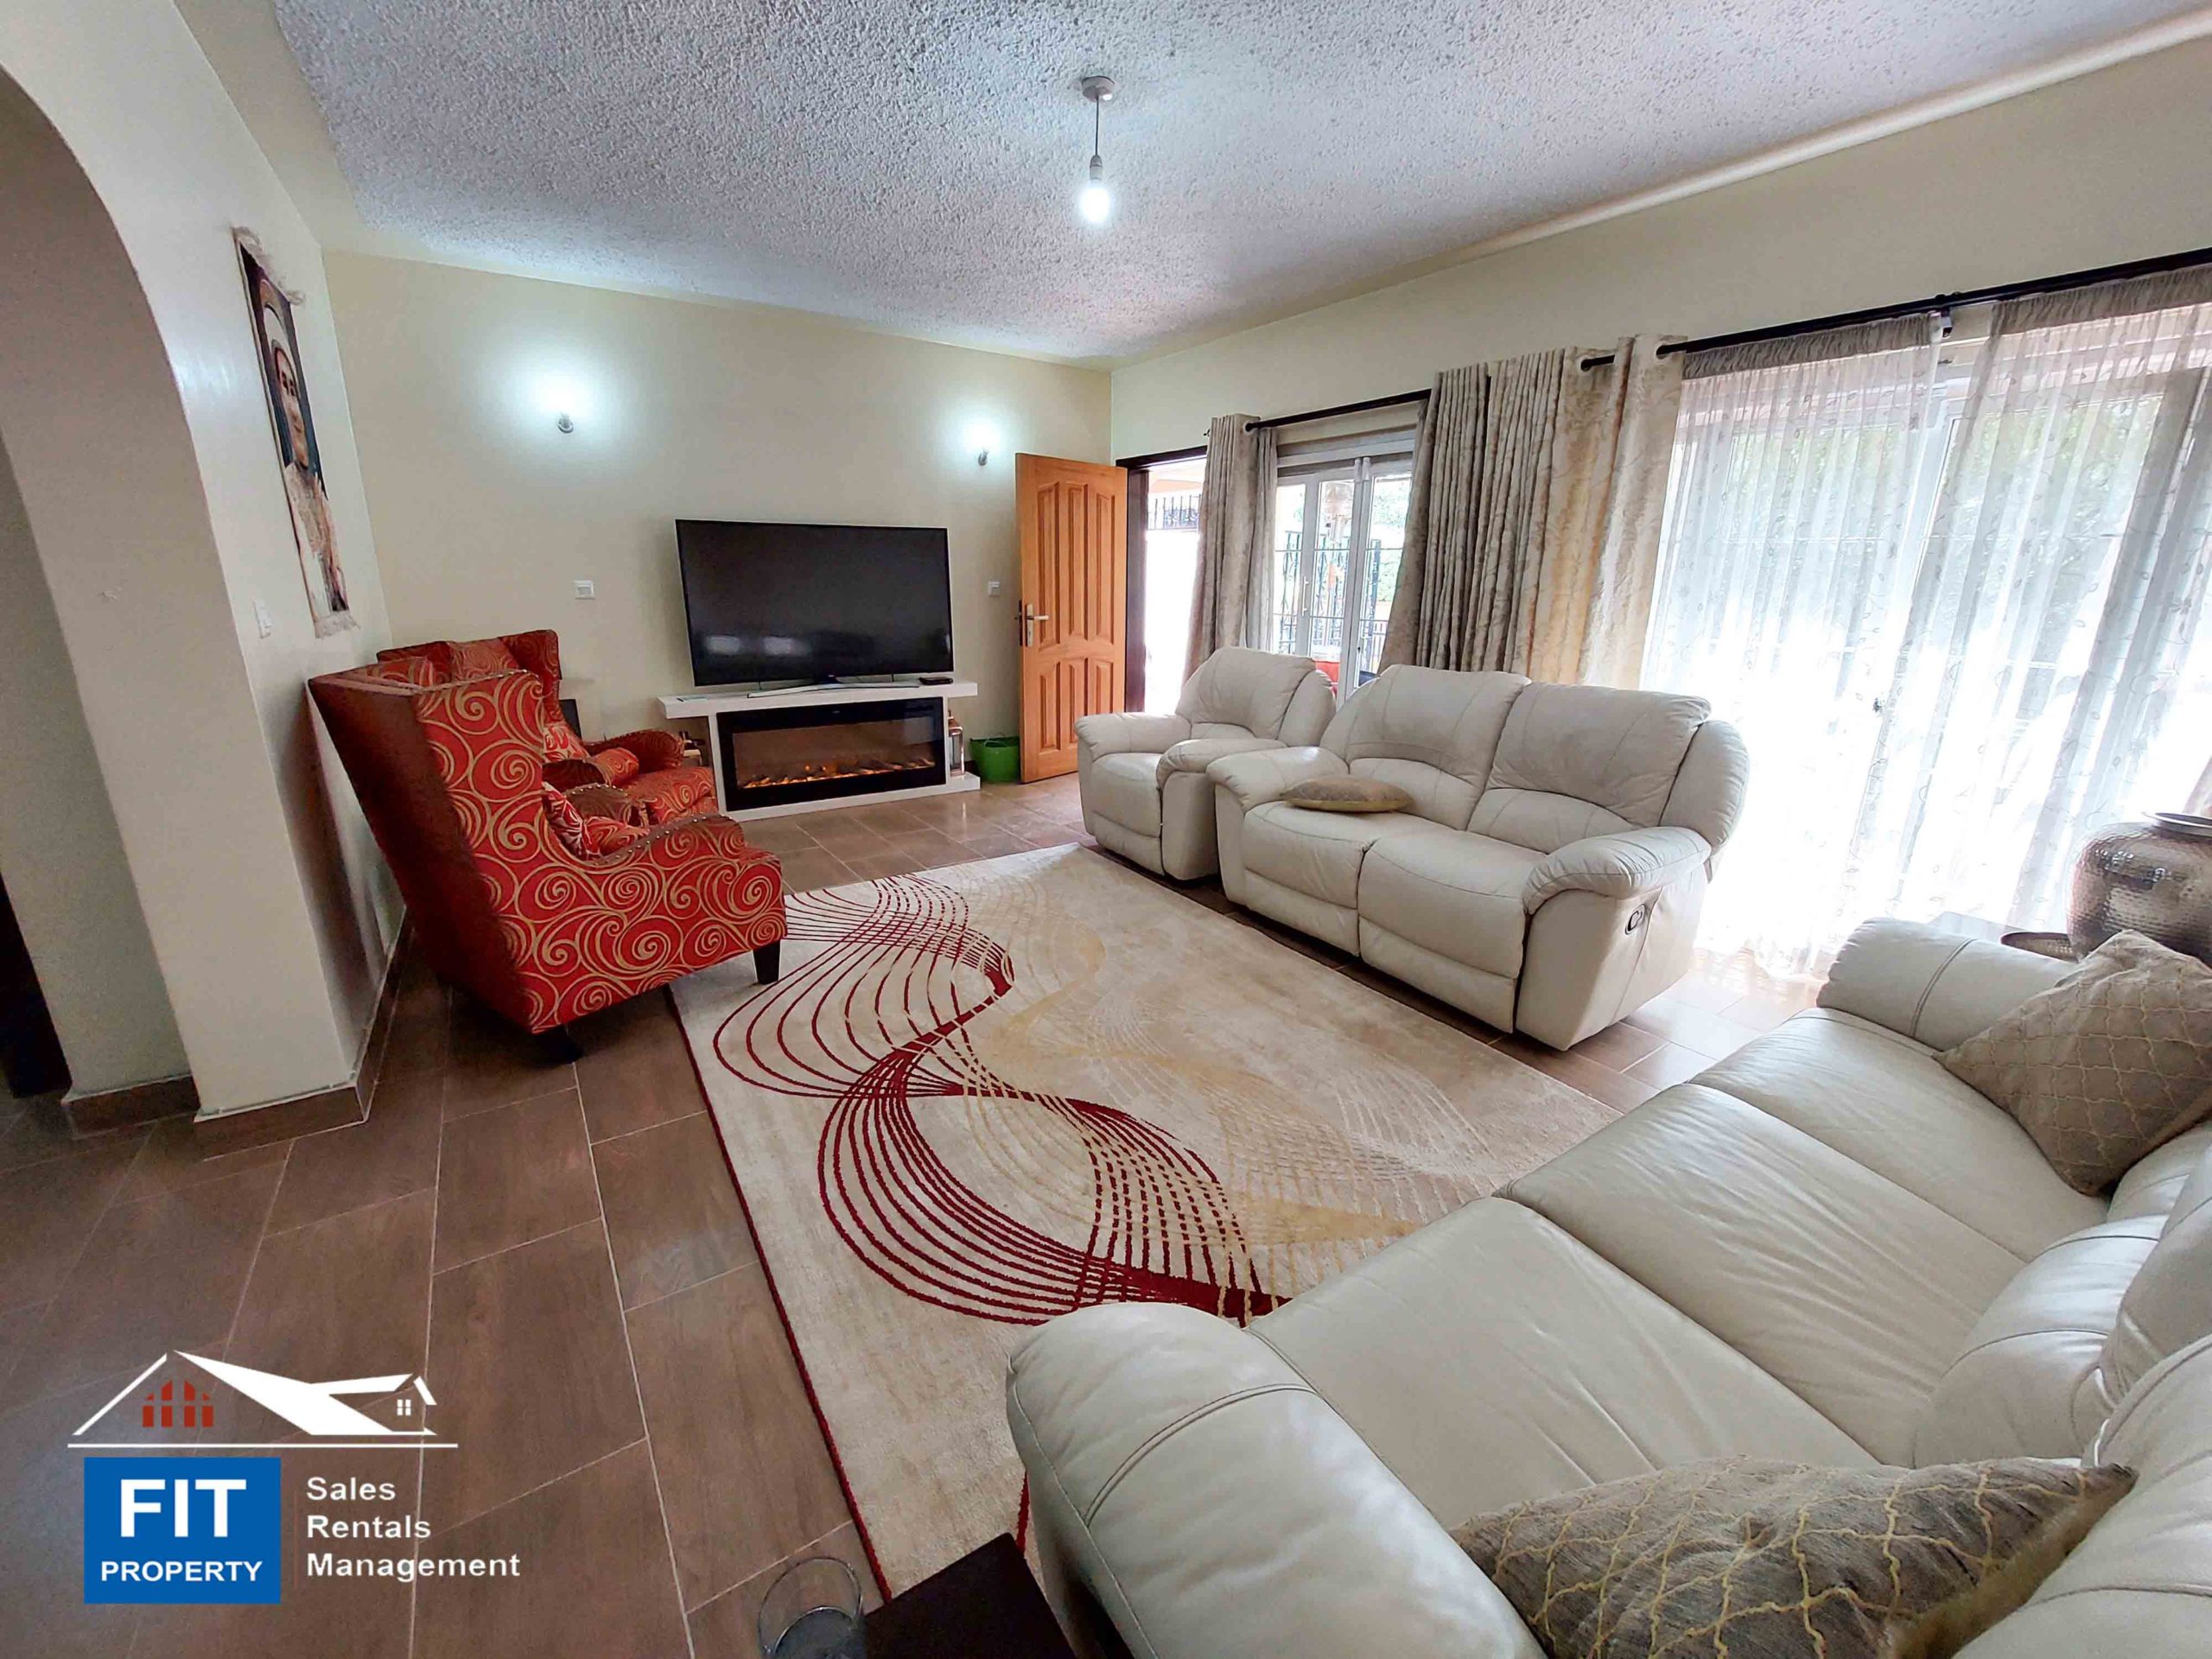 Exquisite 4 Bed Townhouse in Brookside, Westlands. in a secure gated community comprising 10 attached homes. Price: 40M